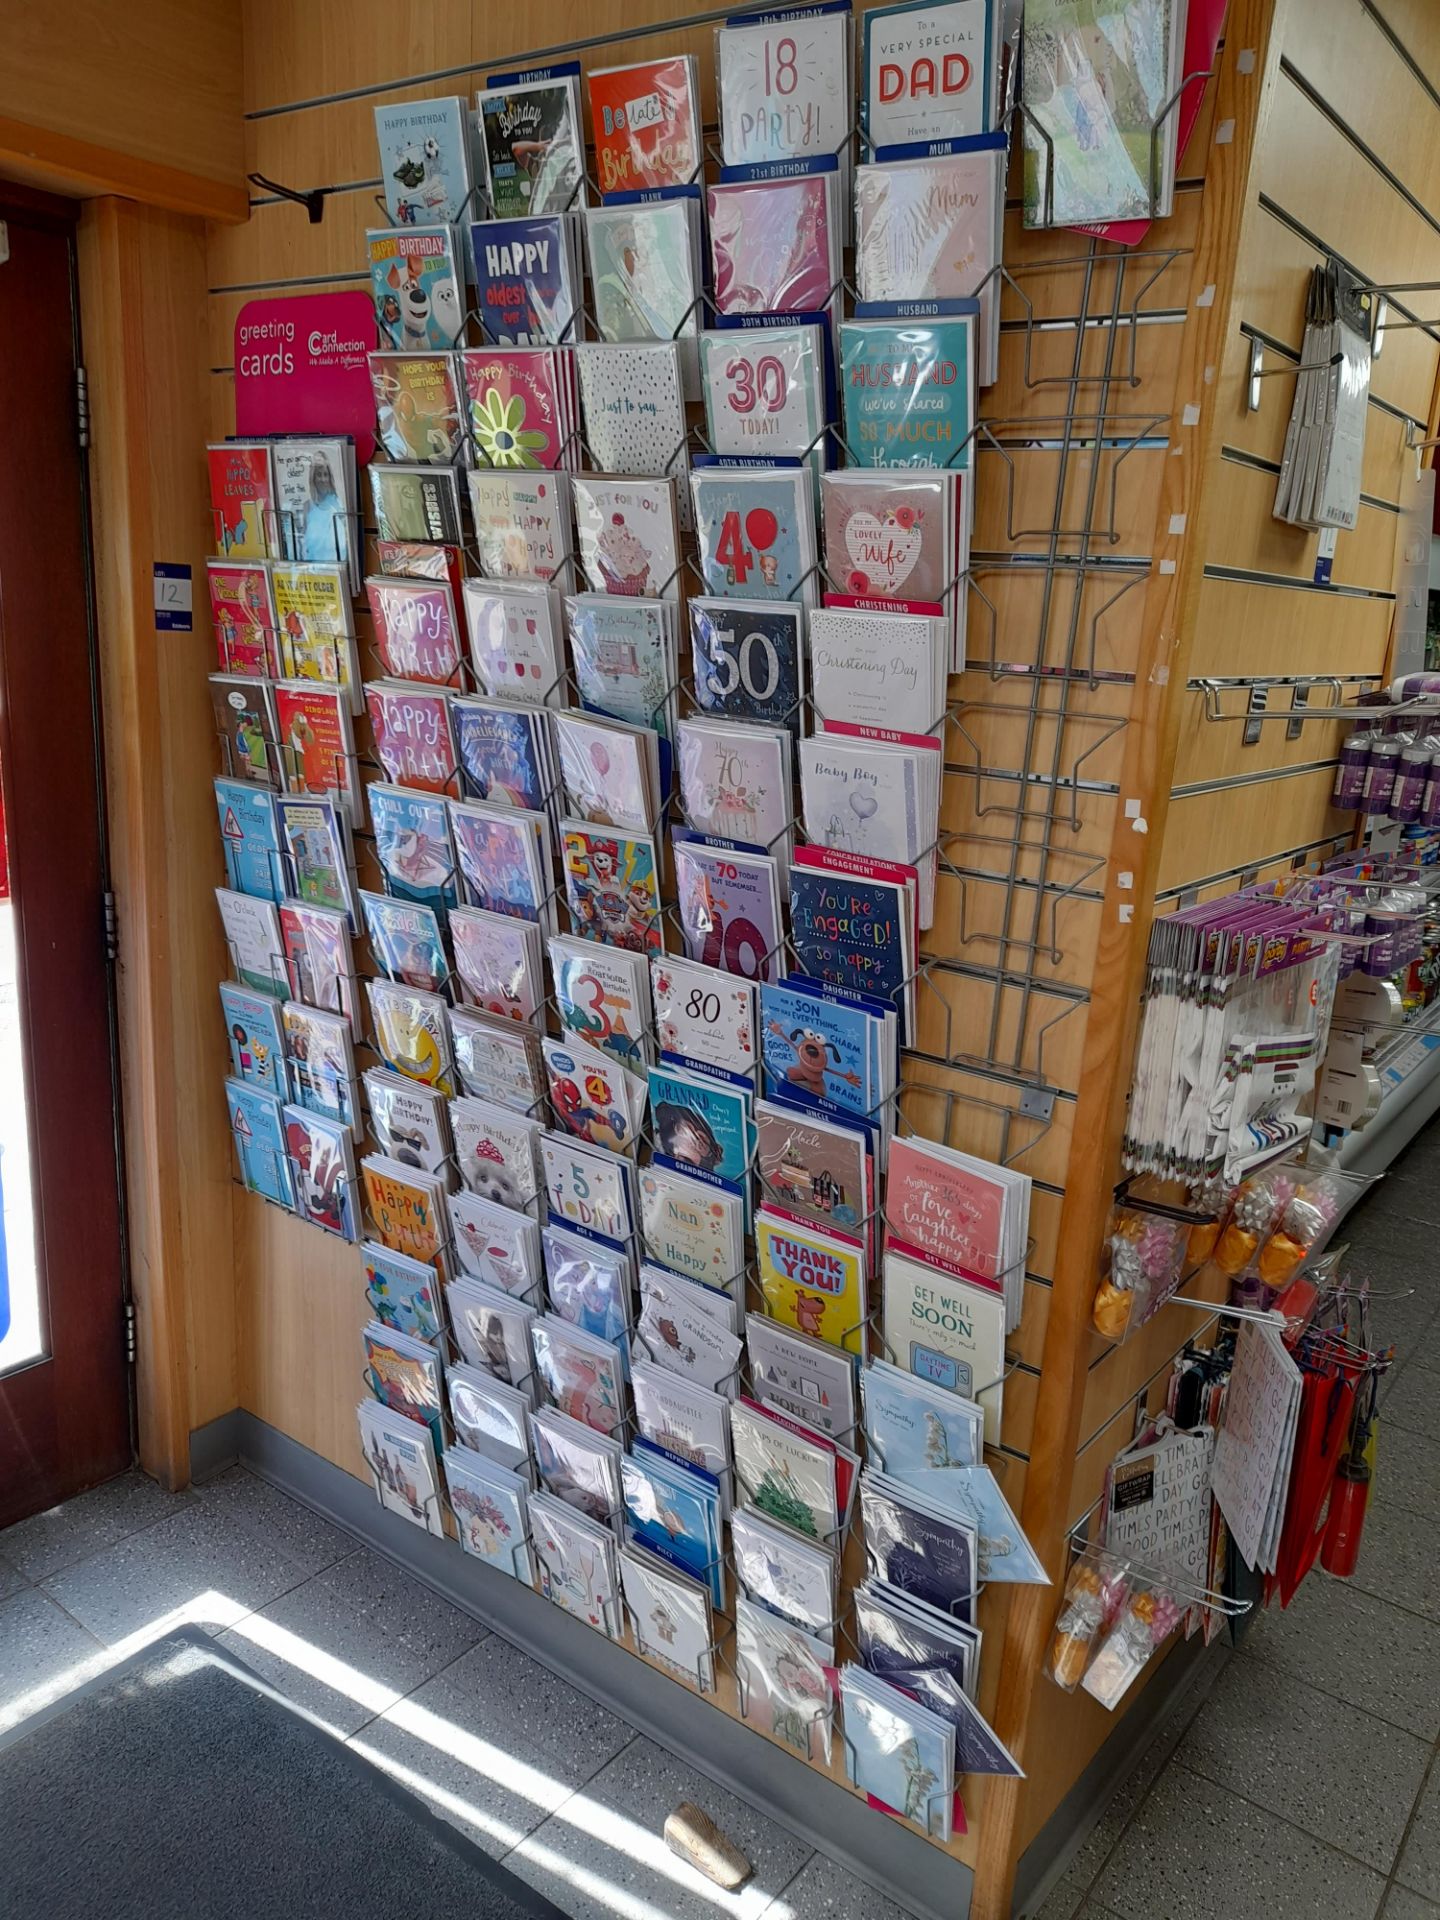 Assortment of cards and gift accessories, to wall